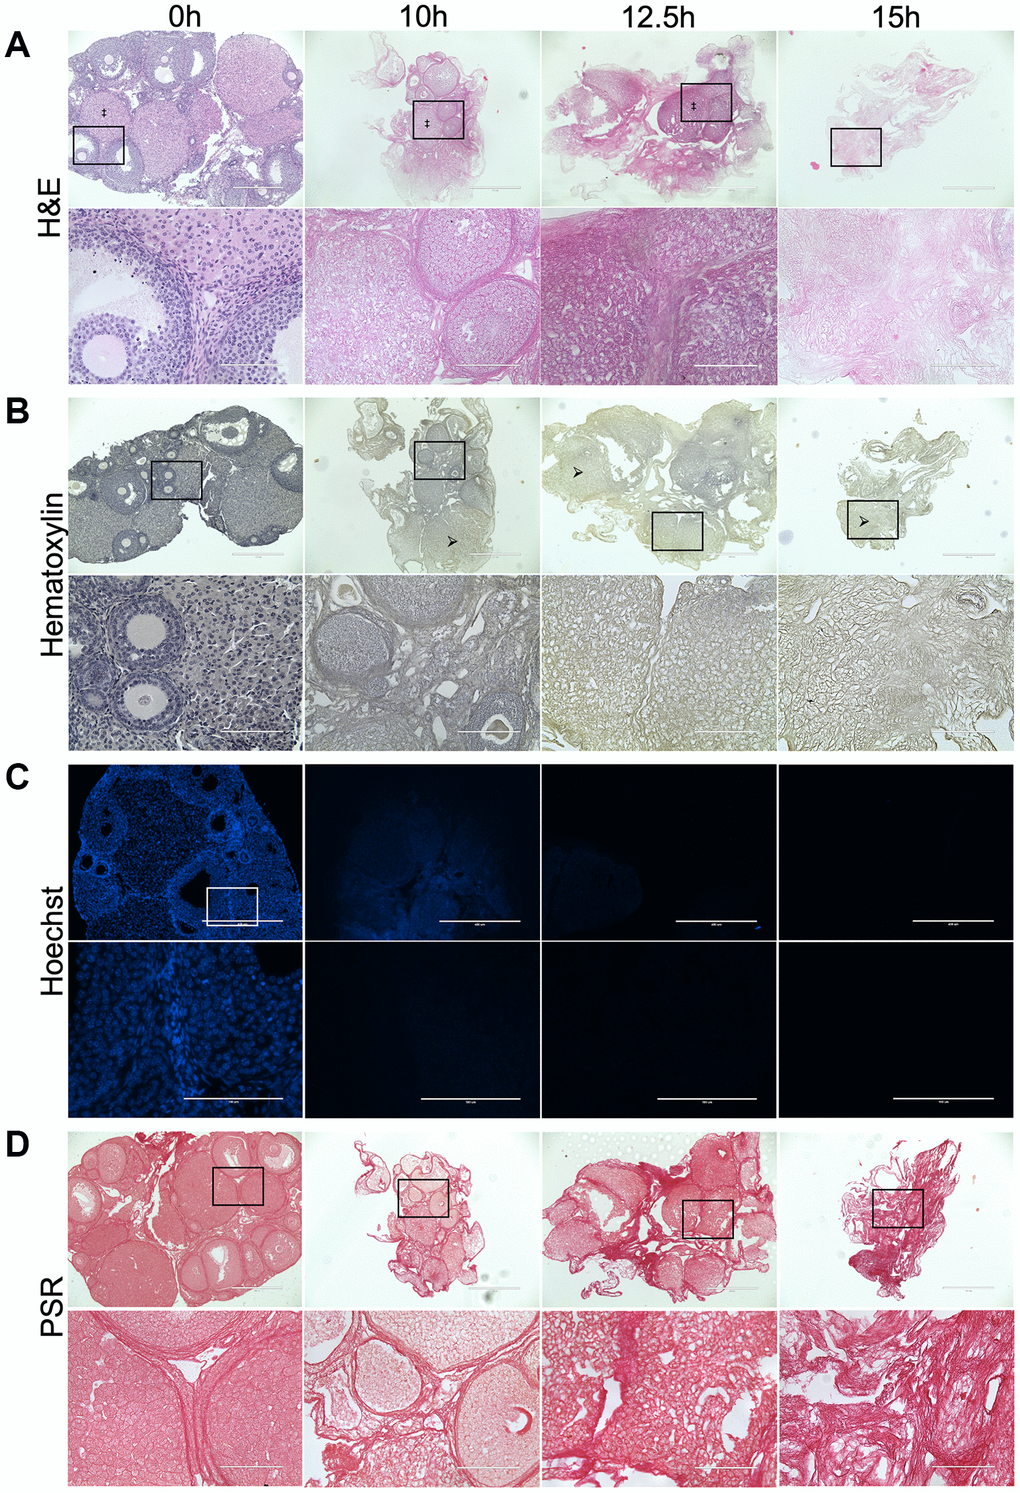 Treatment with 0.1% SDS enriches for the ovarian ECM in 12.5 hours. Representative images of H&E (A), Hematoxylin (B), Hoechst (C), and PSR (D) stained ovarian tissue sections following treatment with 0.1% SDS for 0 h (native), 10 h, 12.5 h, or 15 h. Bottom row of each panel is optical zoom of boxed region from top row. Scale bar for top row for each panel = 400 μm. Scale bar for bottom row for each panel = 100 μm. N = 3–4 ovaries per group. Example of a corpus luteum indicated by ‡ in H&E-stained images. Example of region without nuclei indicated by arrows in Hematoxylin-stained images.